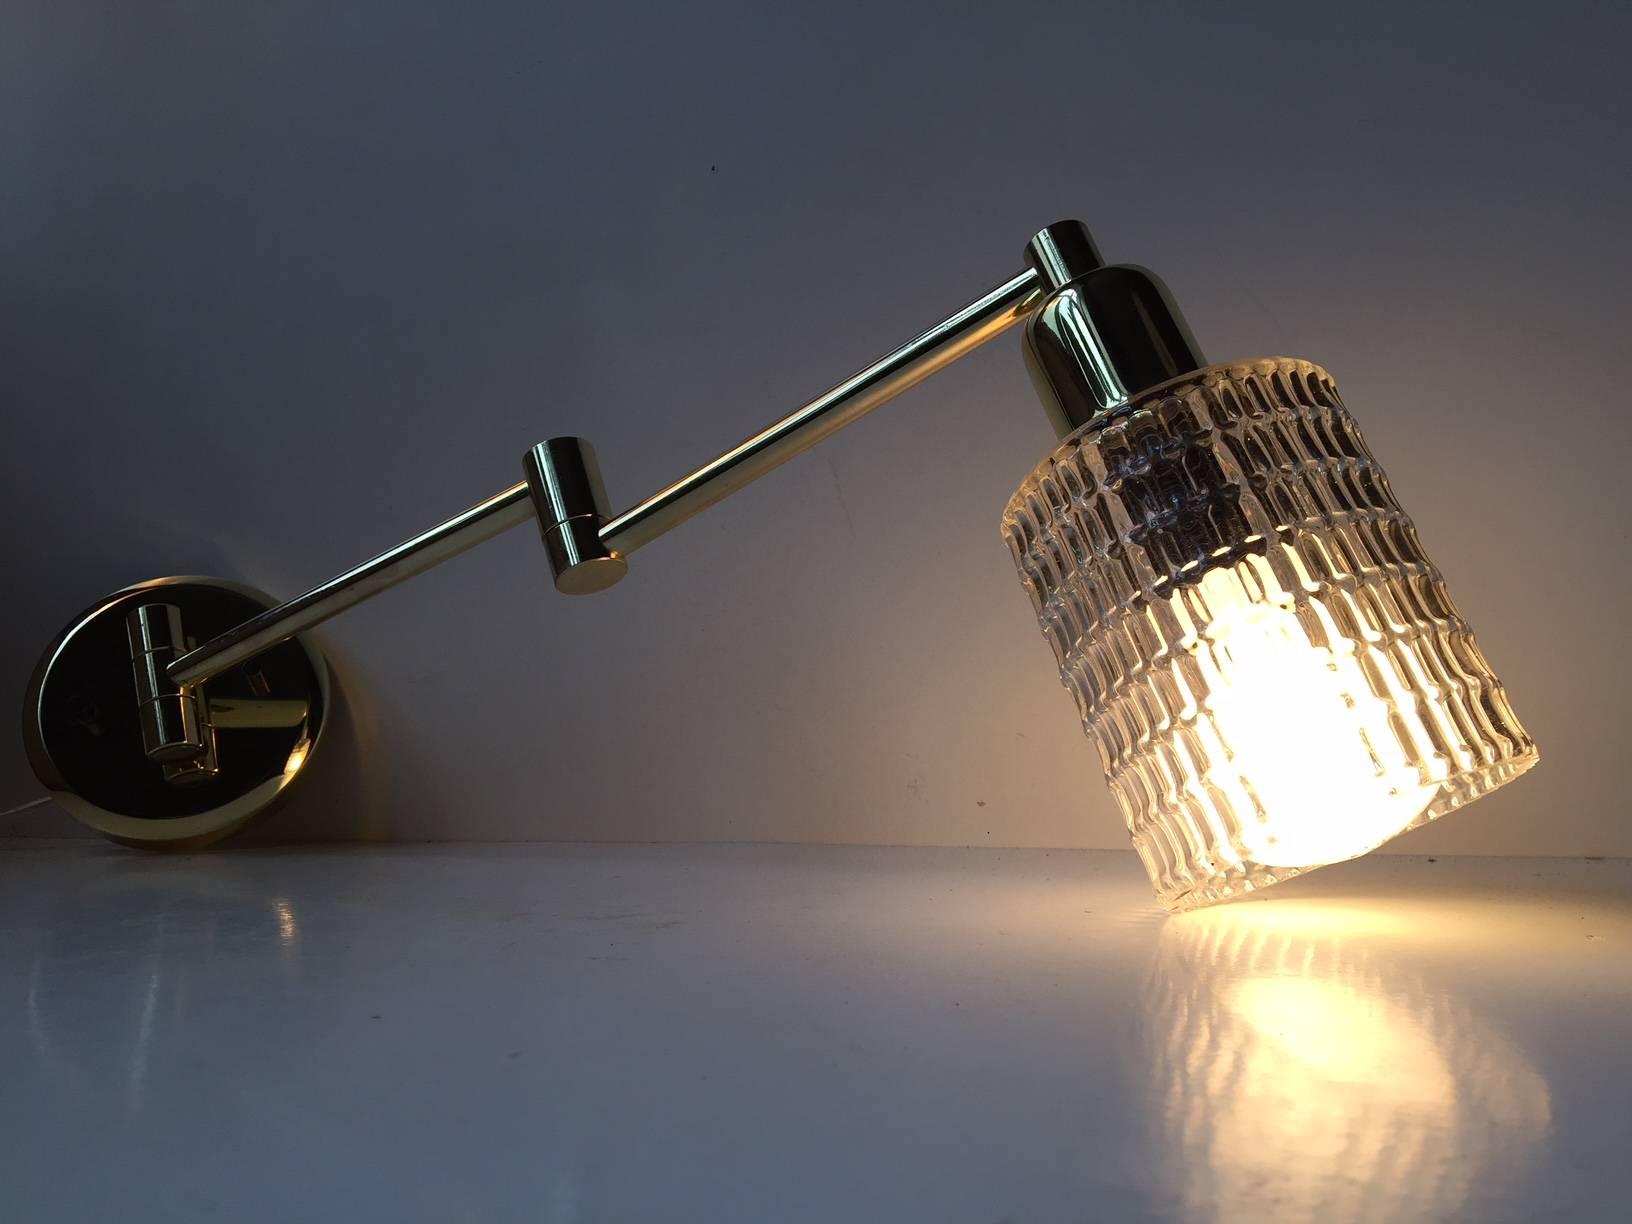 Adjustable swing arm wall light. Made of polished solid brass. Mounted with a diamond patterned clear glass shade. Manufactured by ABO Metal Art in Denmark during the 1980s.